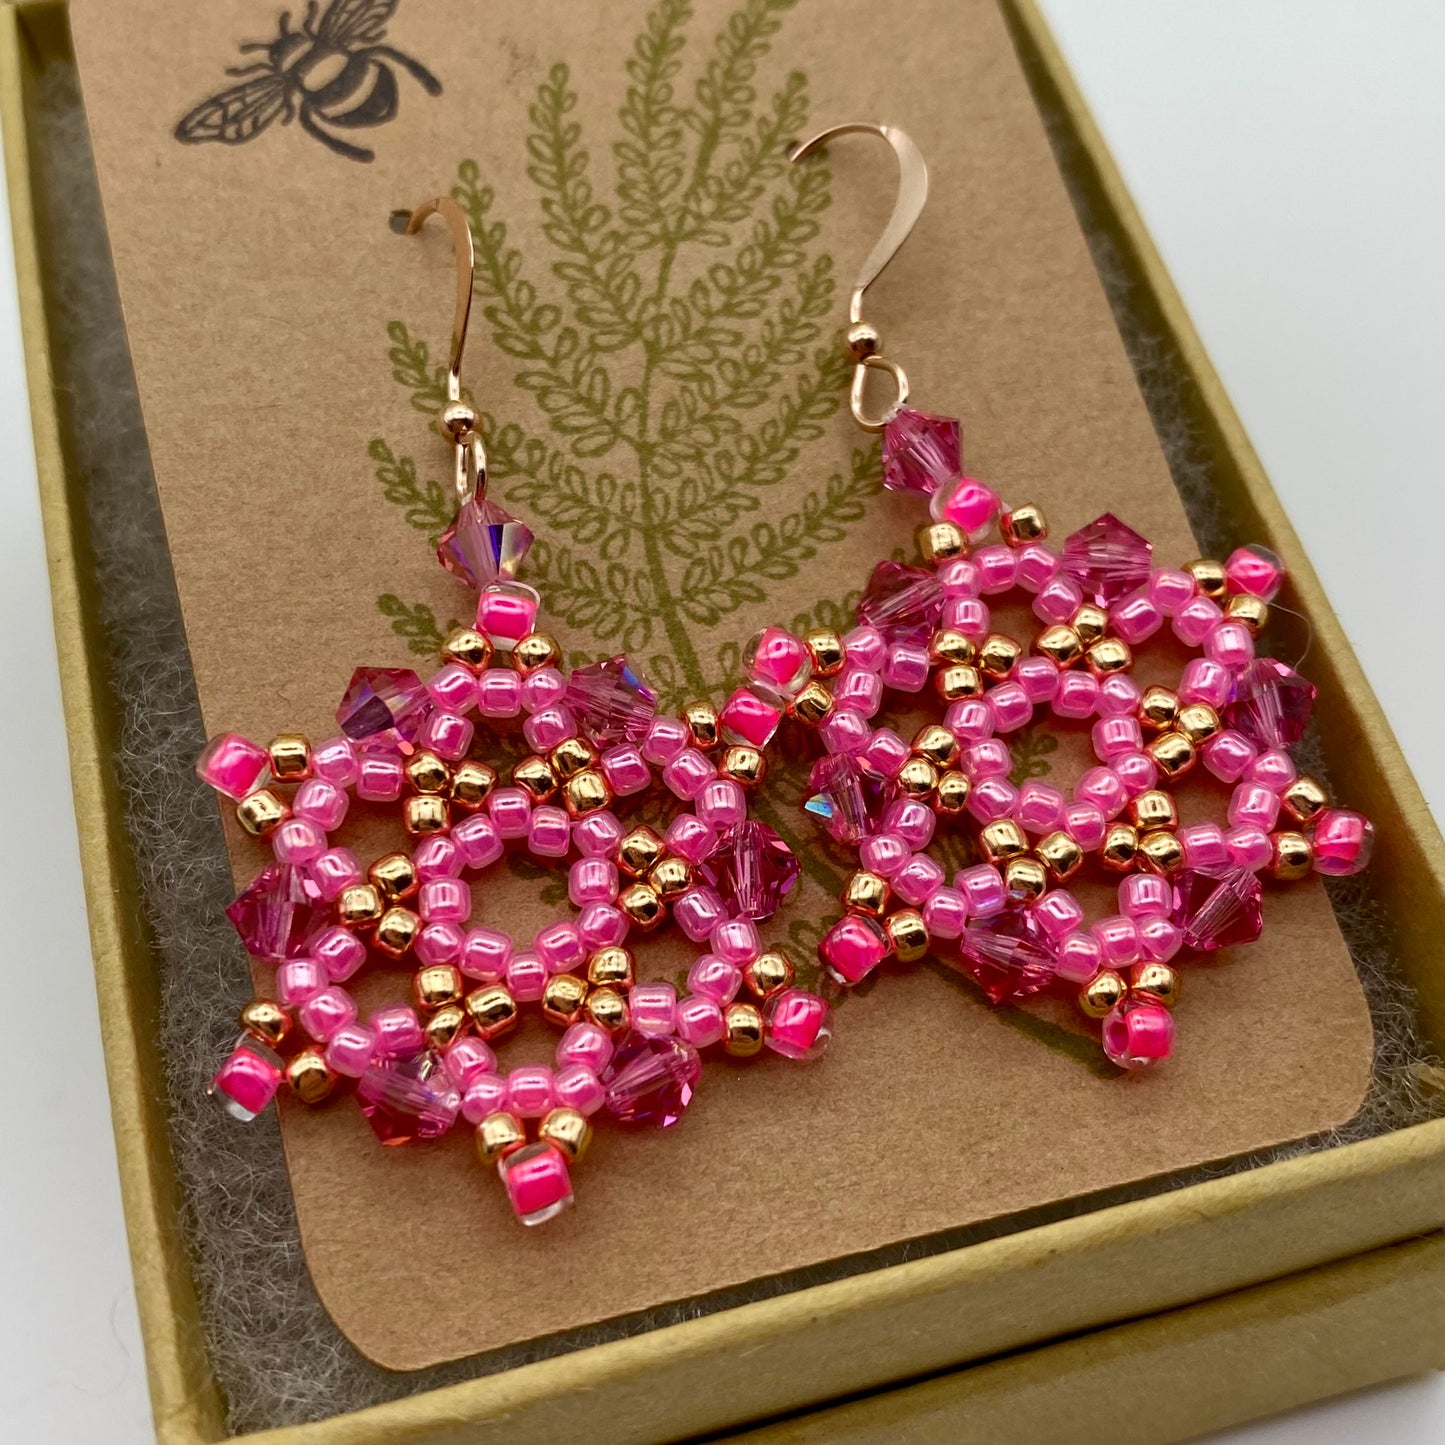 Hot Pink Crystal 14kt Rose Gold Earrings